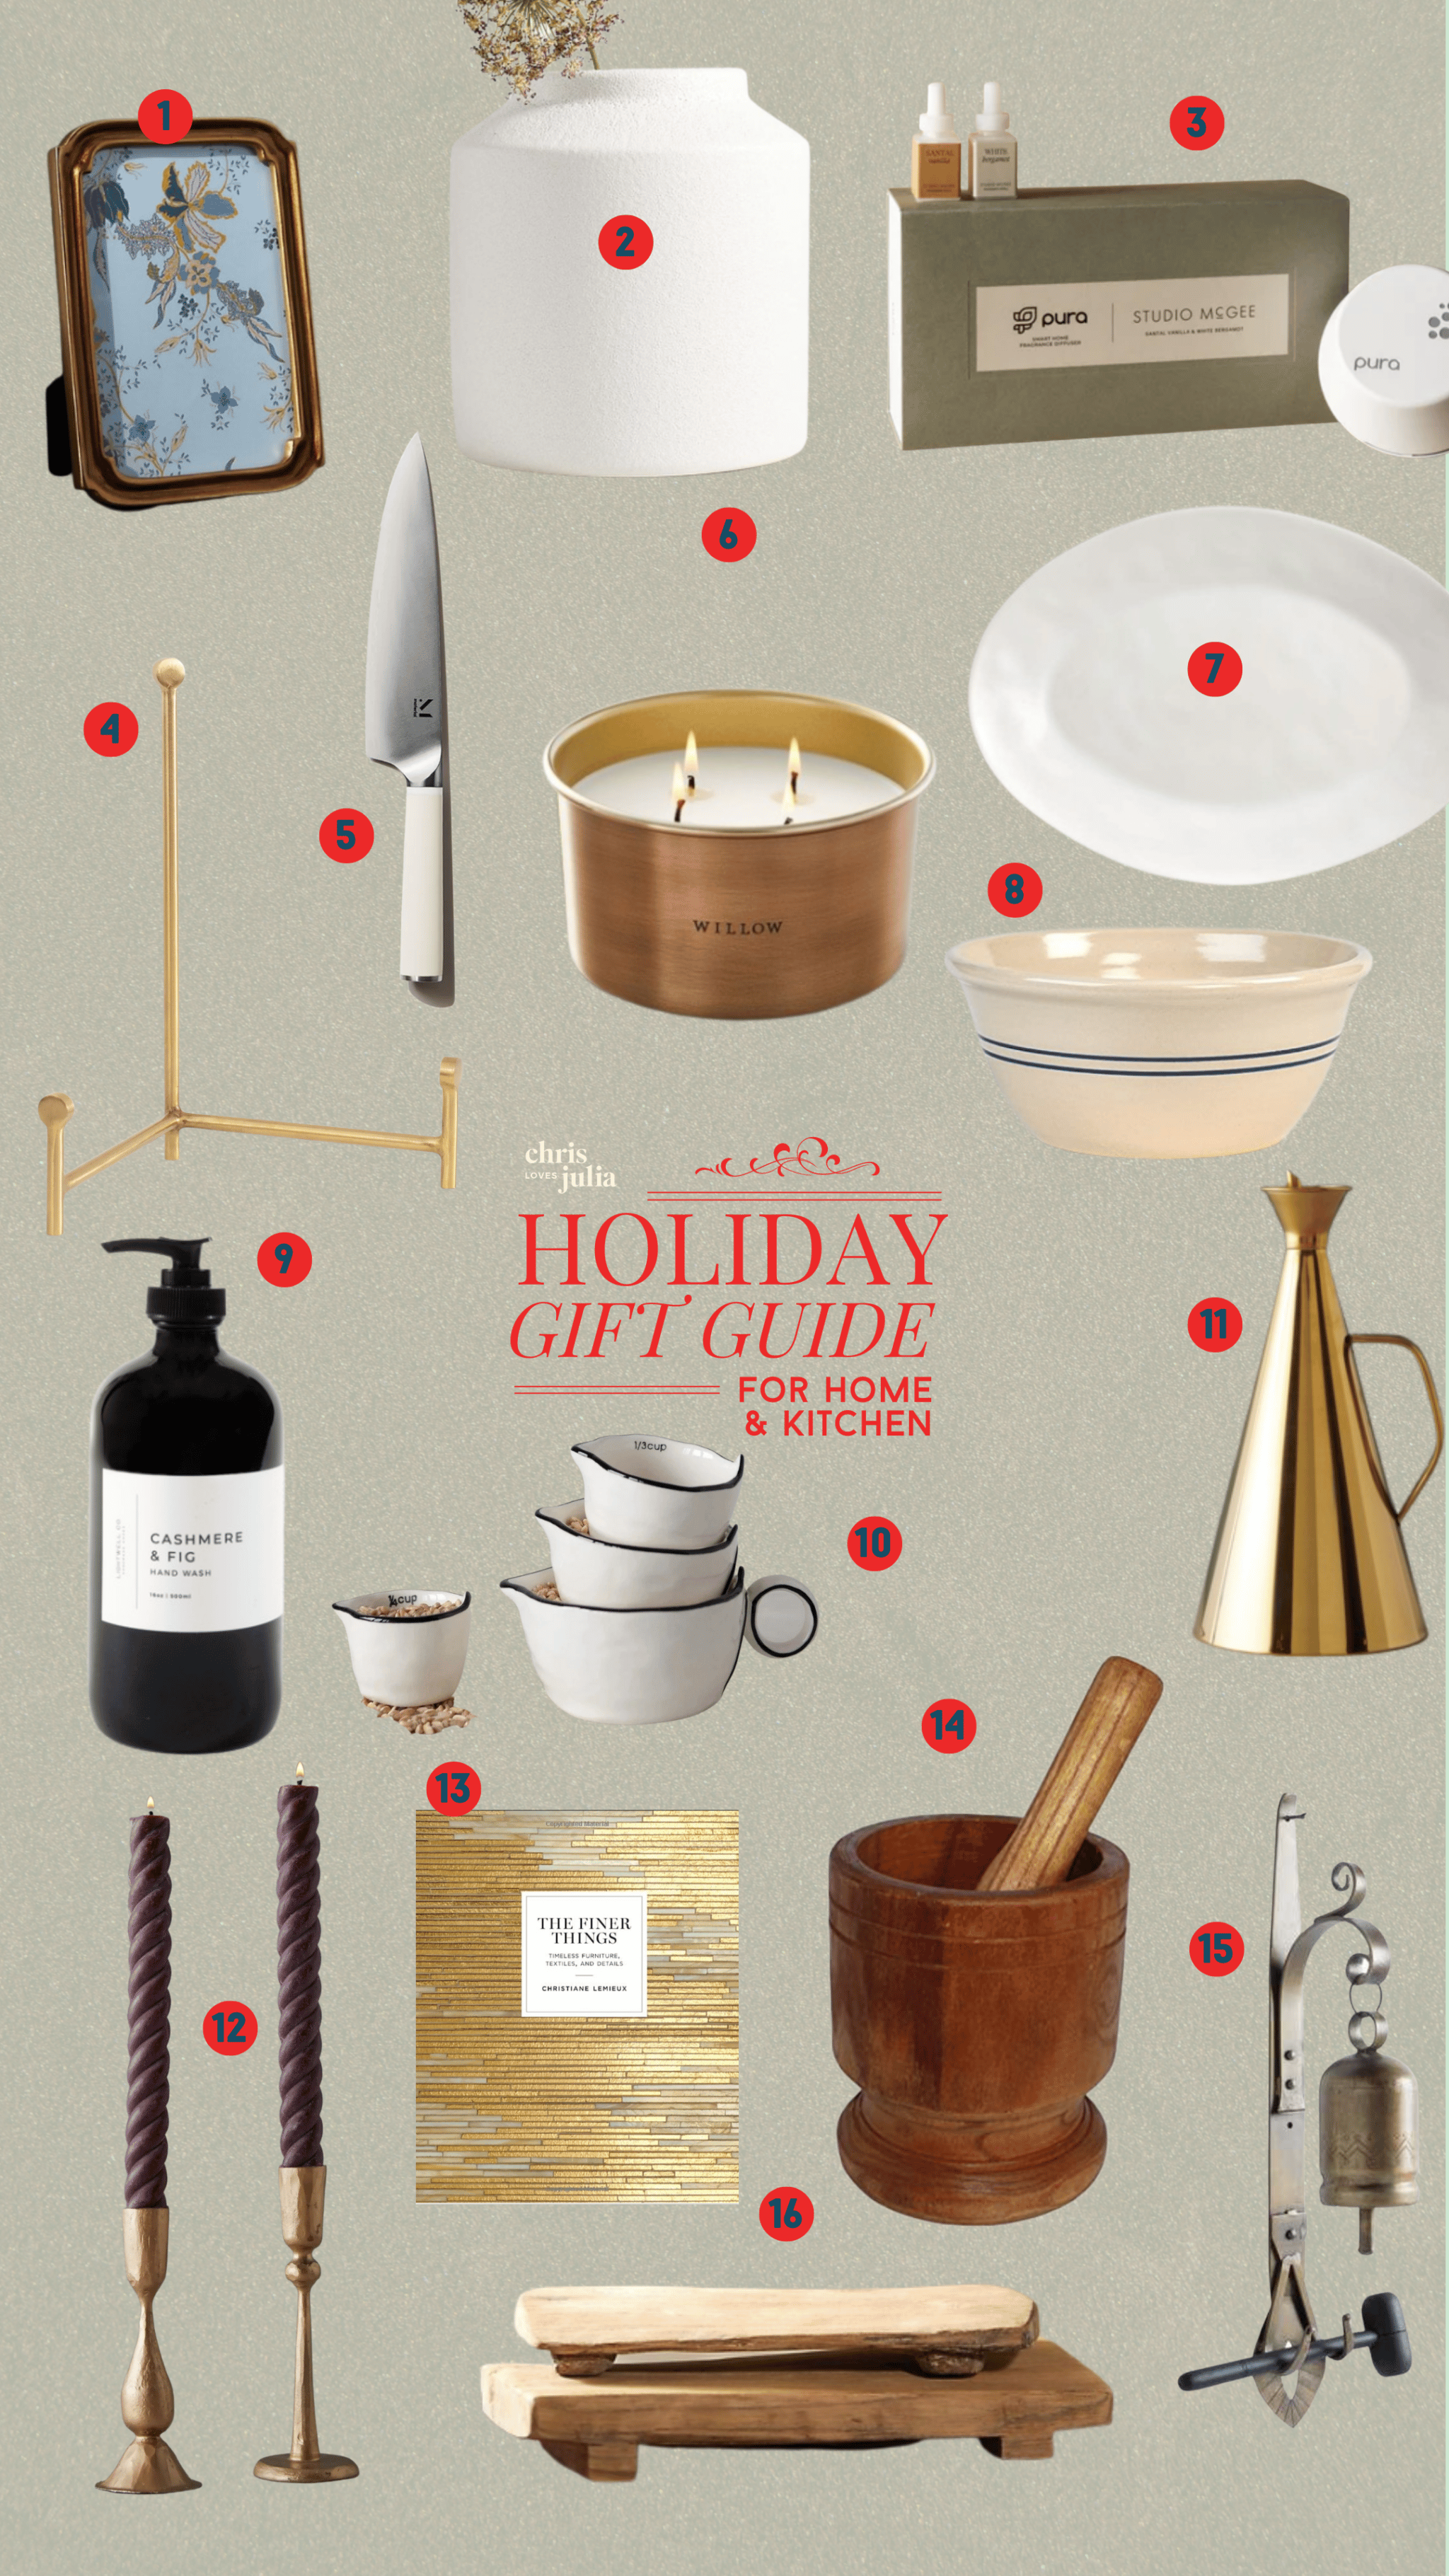 Holiday Gift Guide For Home & Kitchen 2022 - Chris Loves Julia